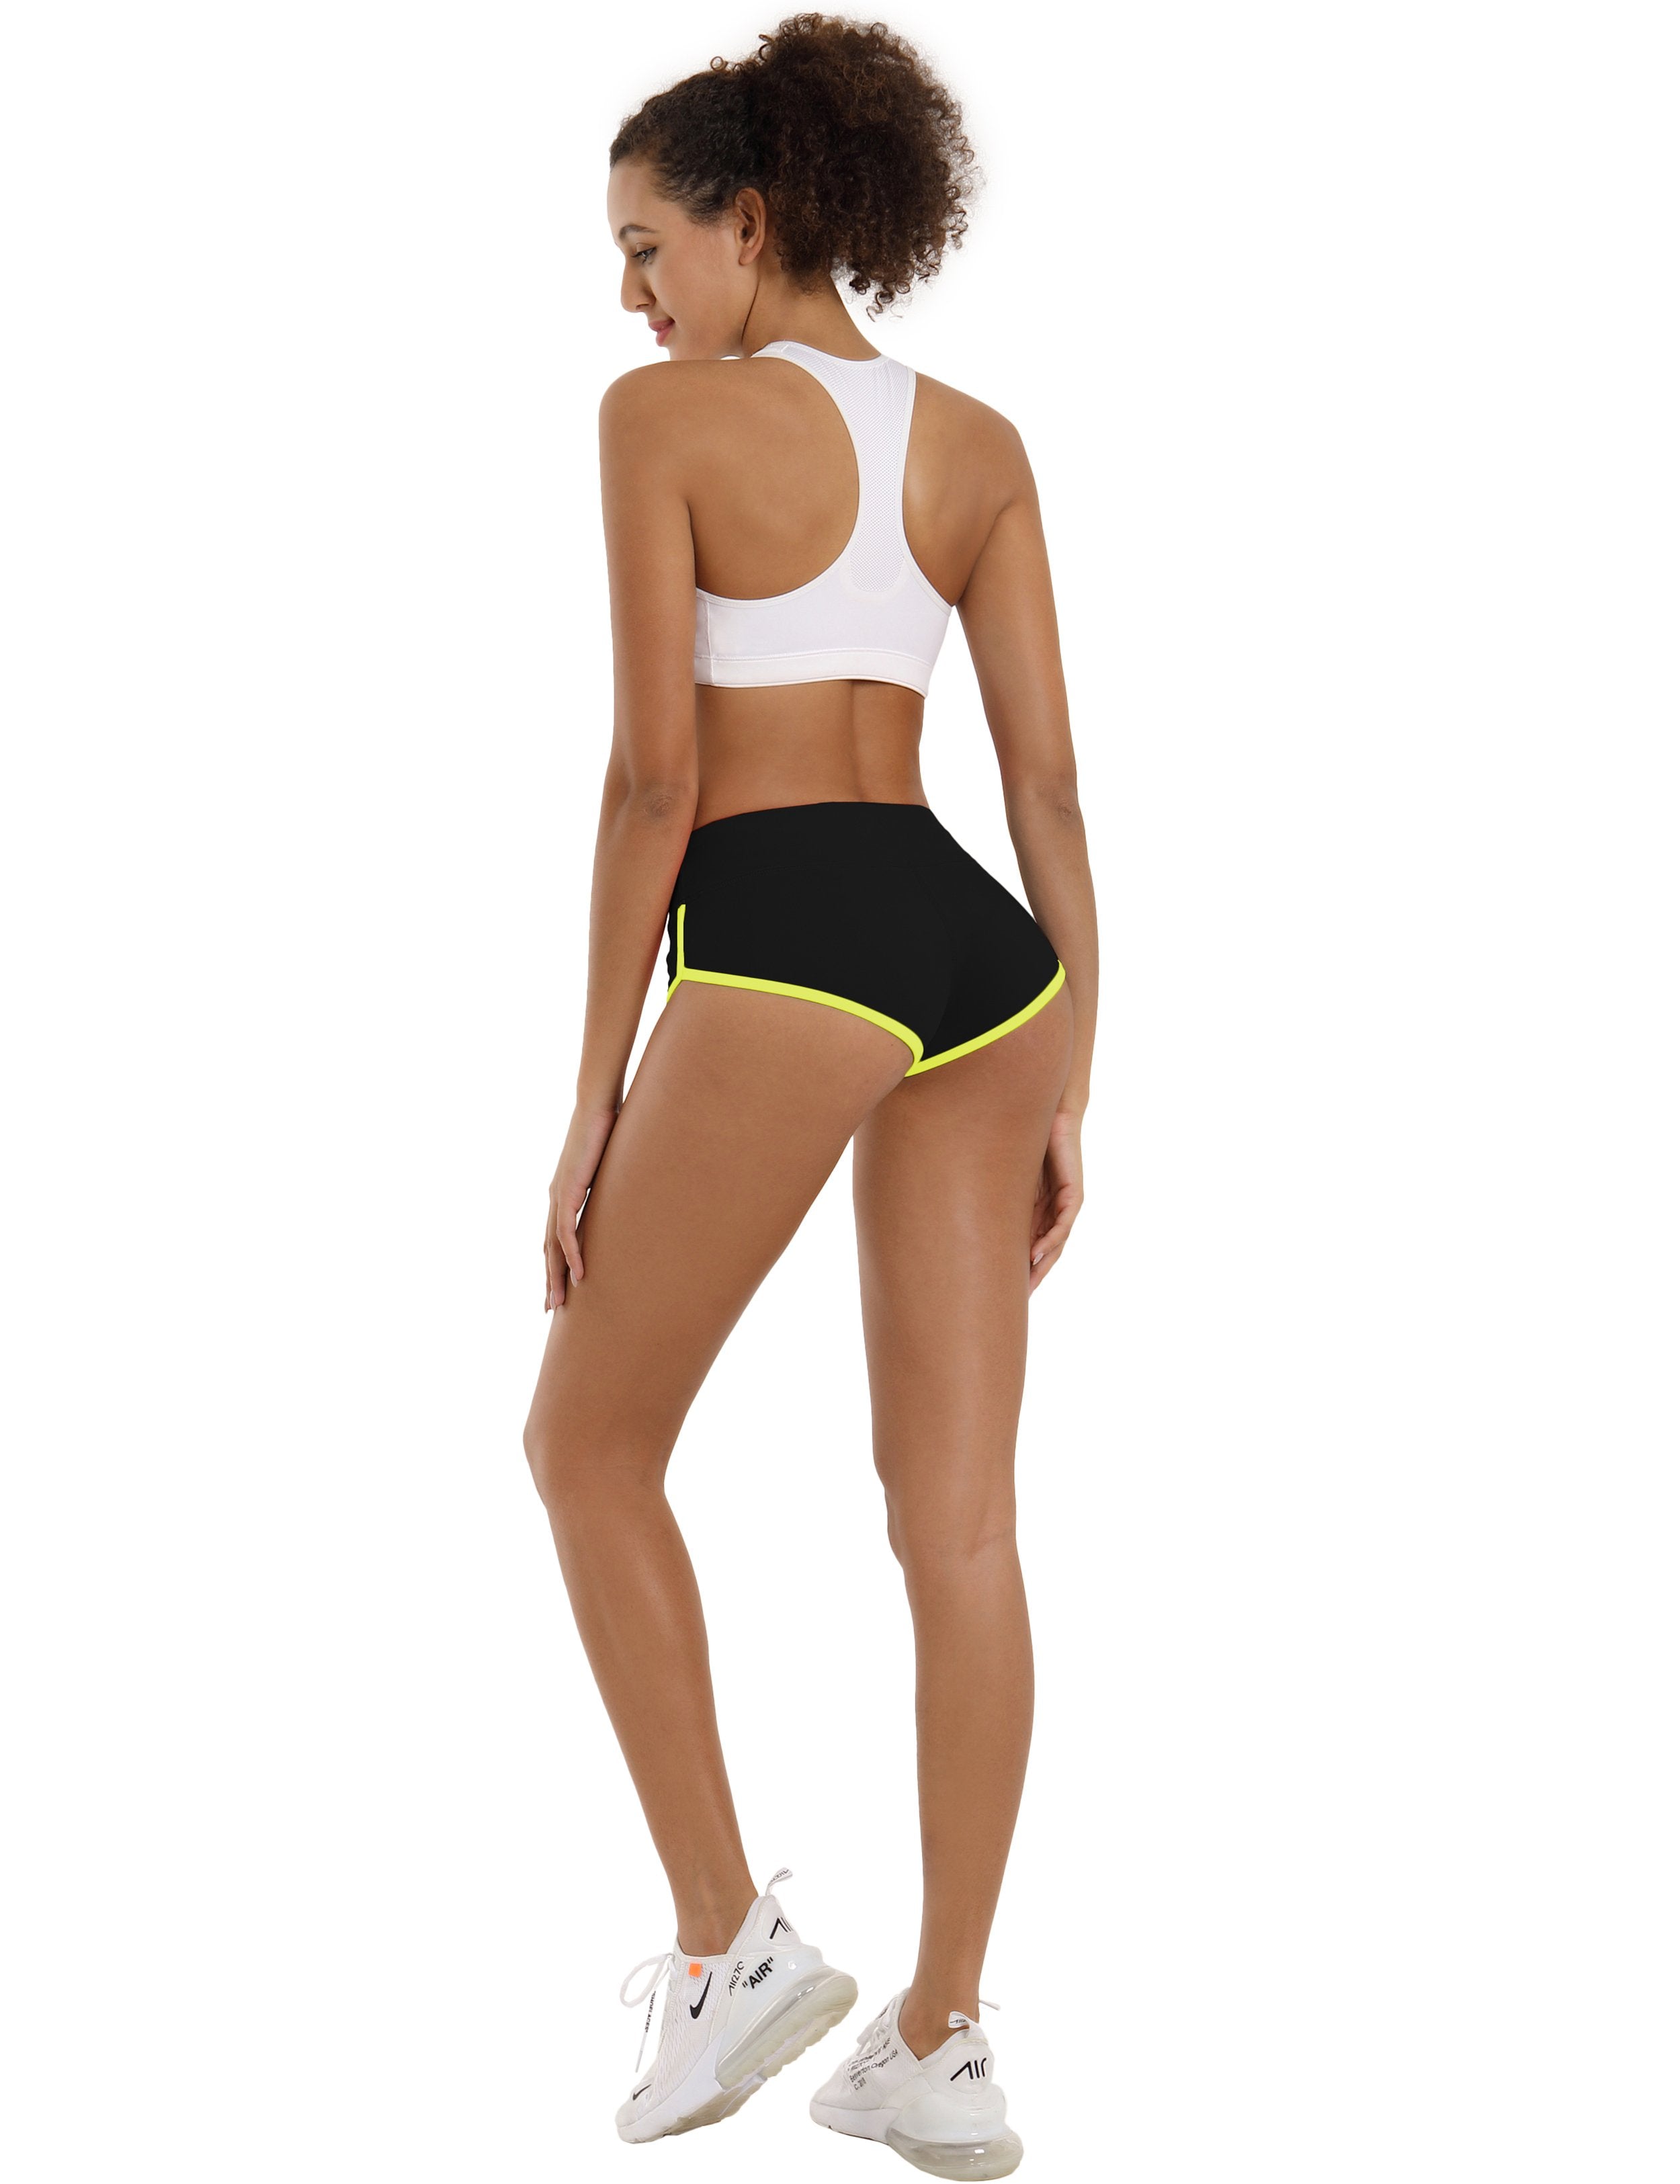 Sexy Booty Tall Size Shorts black_fluorescentyellow Sleek, soft, smooth and totally comfortable: our newest sexy style is here. Softest-ever fabric High elasticity High density 4-way stretch Fabric doesn't attract lint easily No see-through Moisture-wicking Machine wash 75%Nylon/25%Spandex